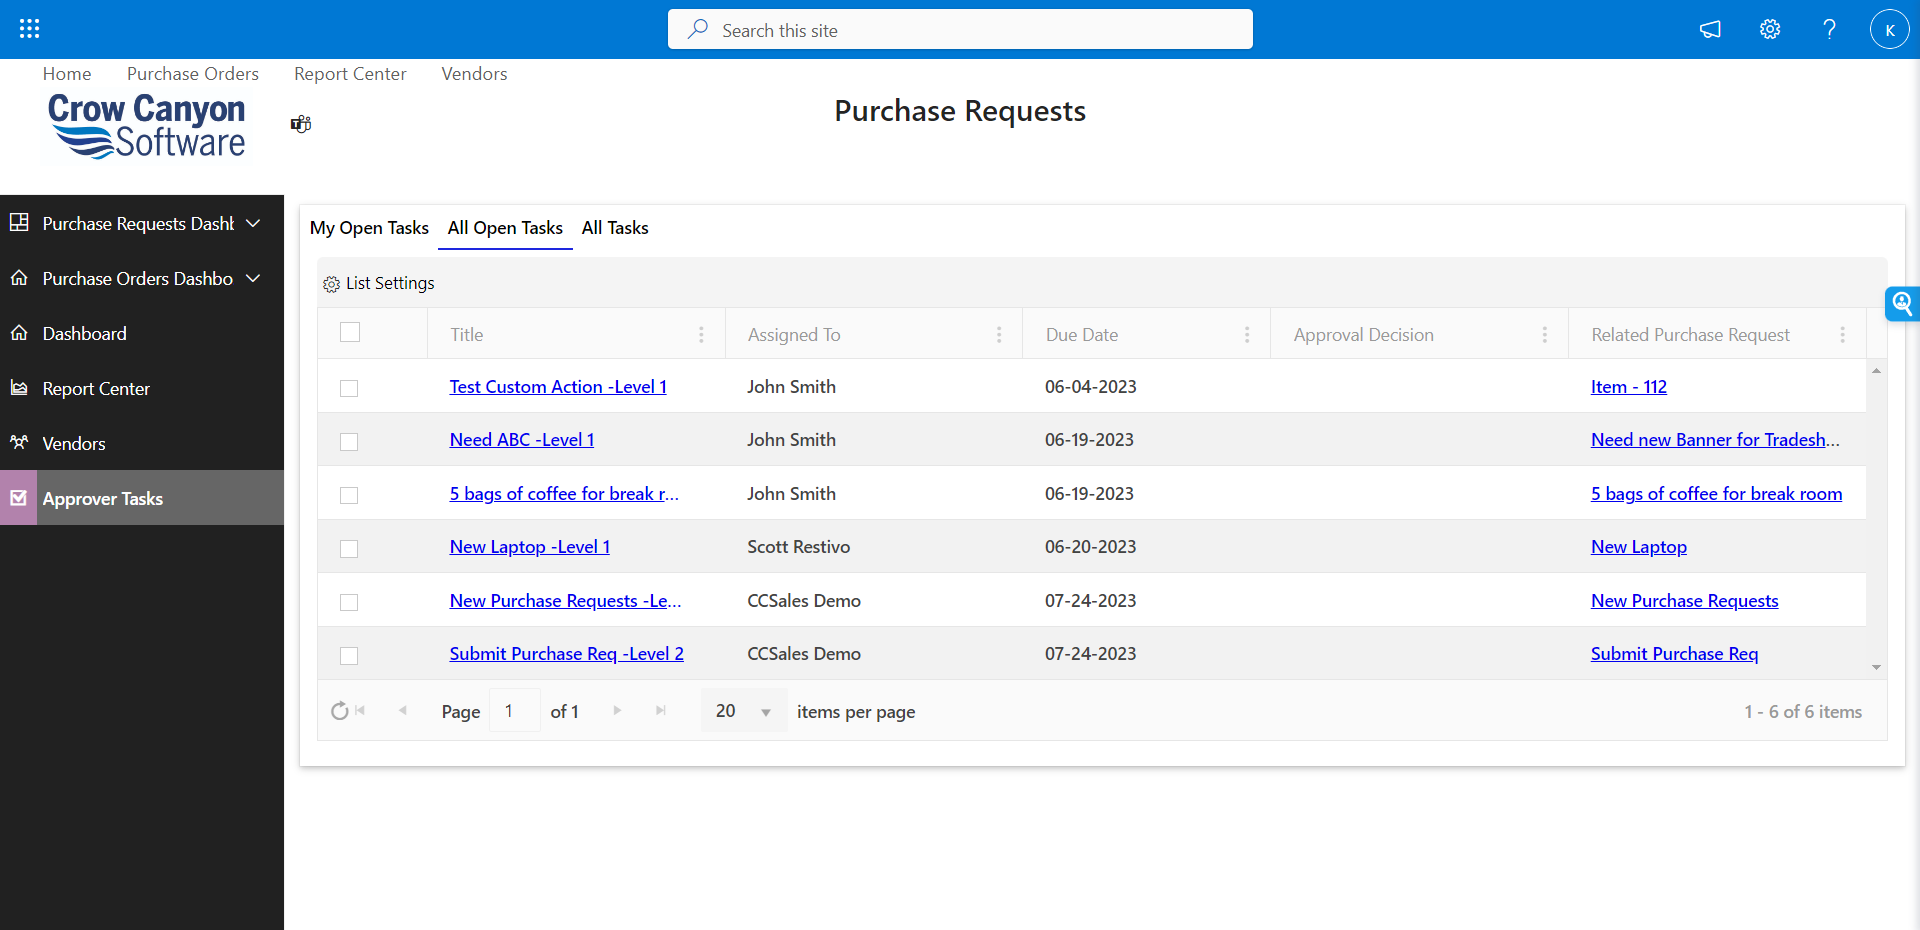 Purchase Requests Approver Tasks